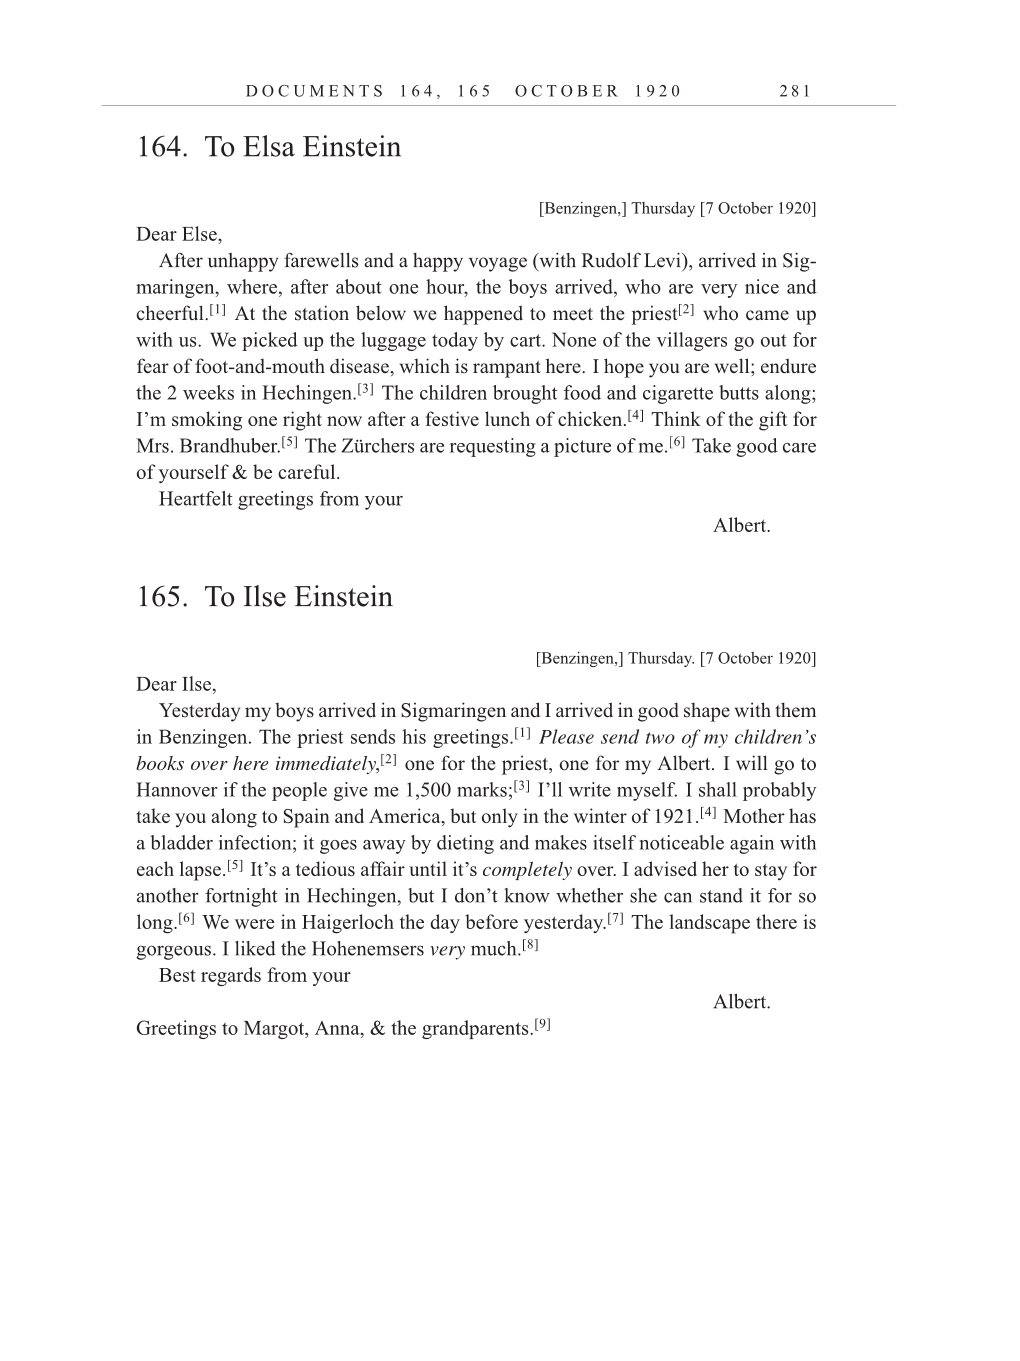 Volume 10: The Berlin Years: Correspondence, May-December 1920, and Supplementary Correspondence, 1909-1920 (English translation supplement) page 281